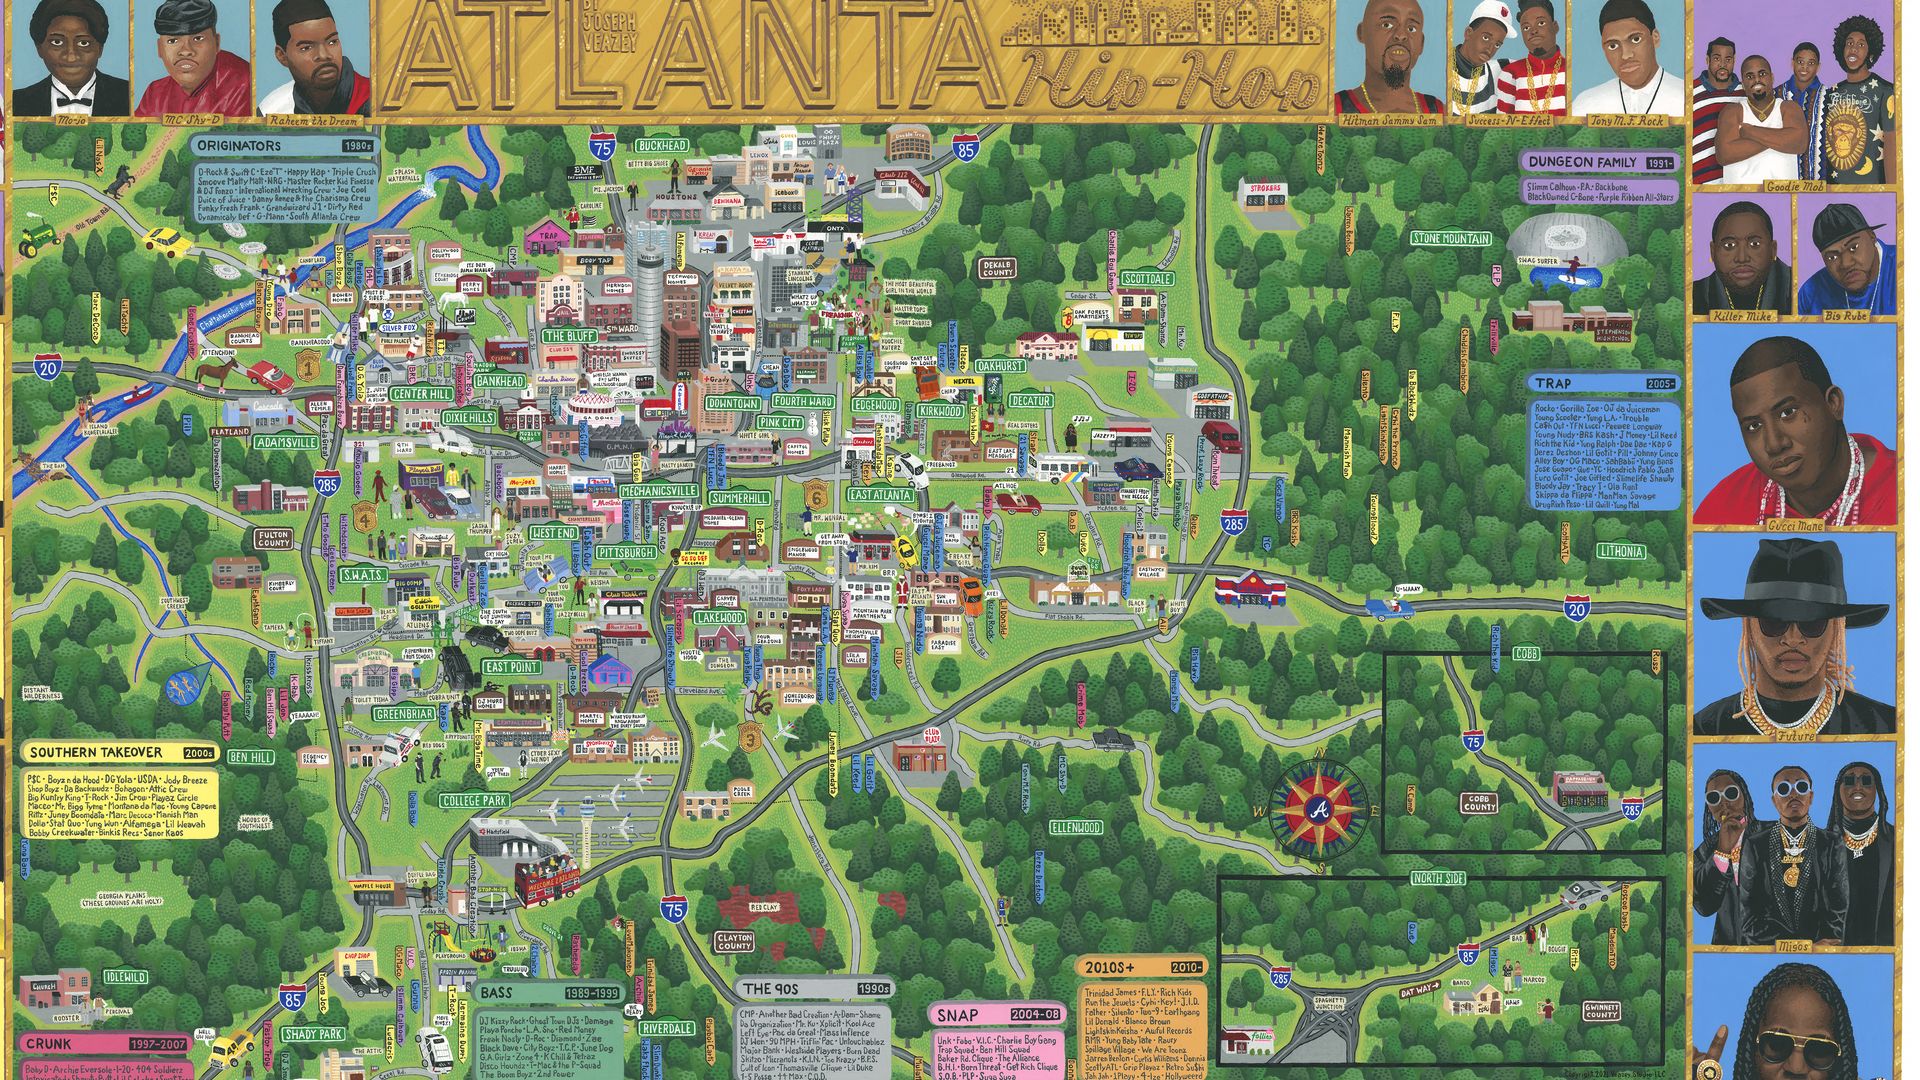 Color illustration of an Atlanta map with call-outs to places made famous in Atlanta hip-hop